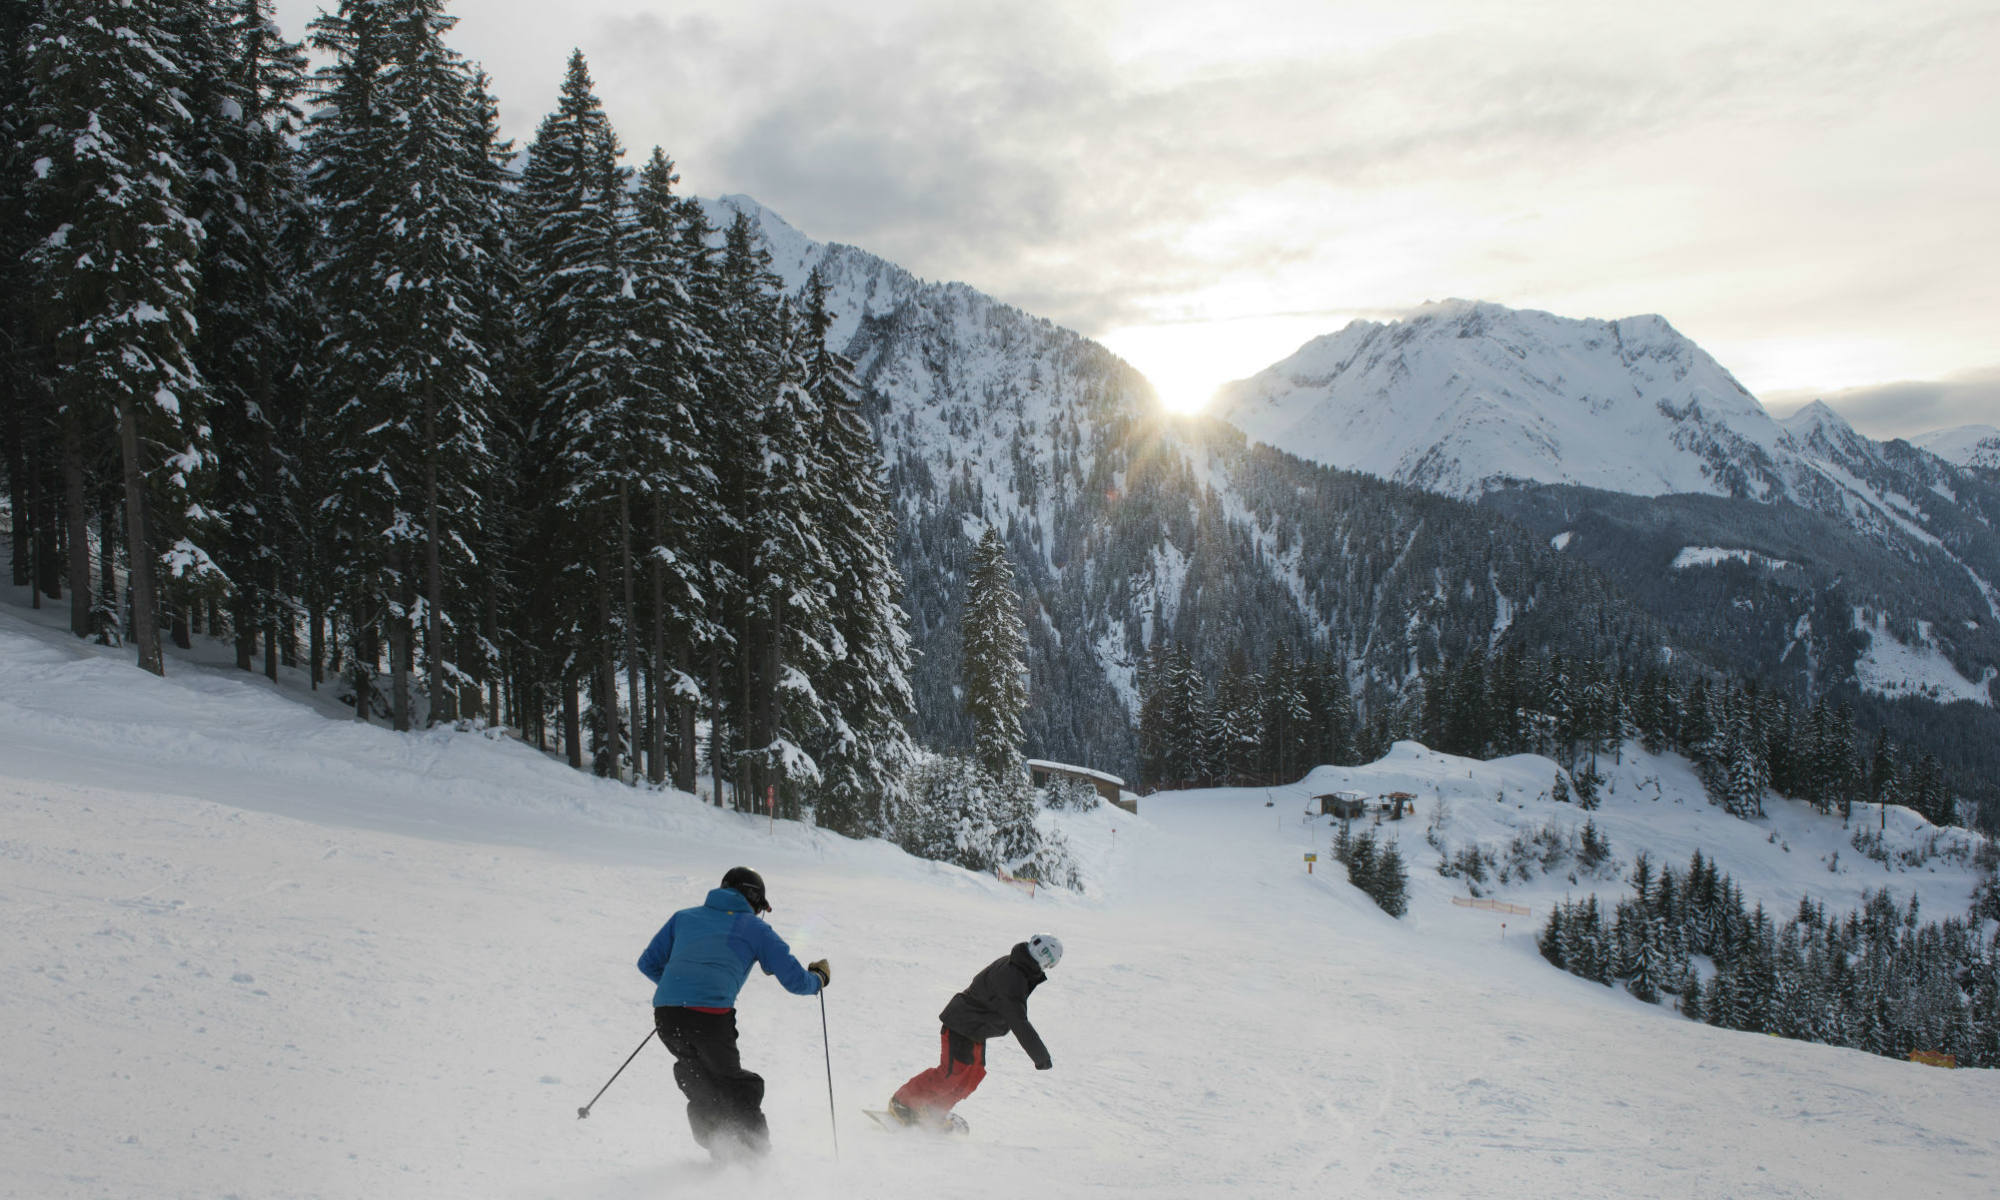 A ski instructor and a snowboarder gliding down a slope in Mayrhofen.